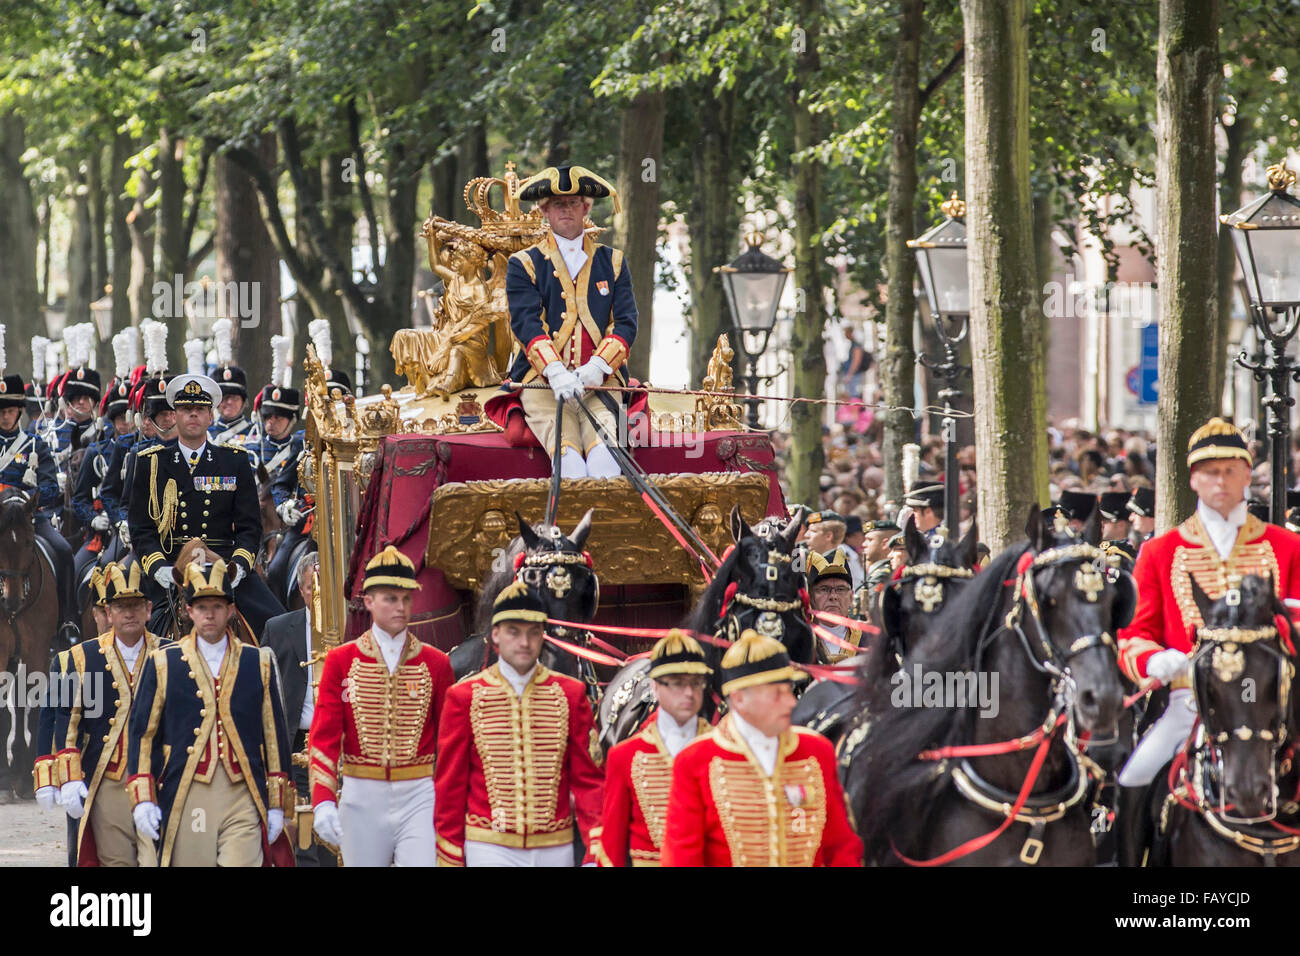 Netherlands 'The Hague' third tuesday of September Prinsjesdag Tour of 'Queen Maxima' and King Willem Alexander in golden coach. Stock Photo